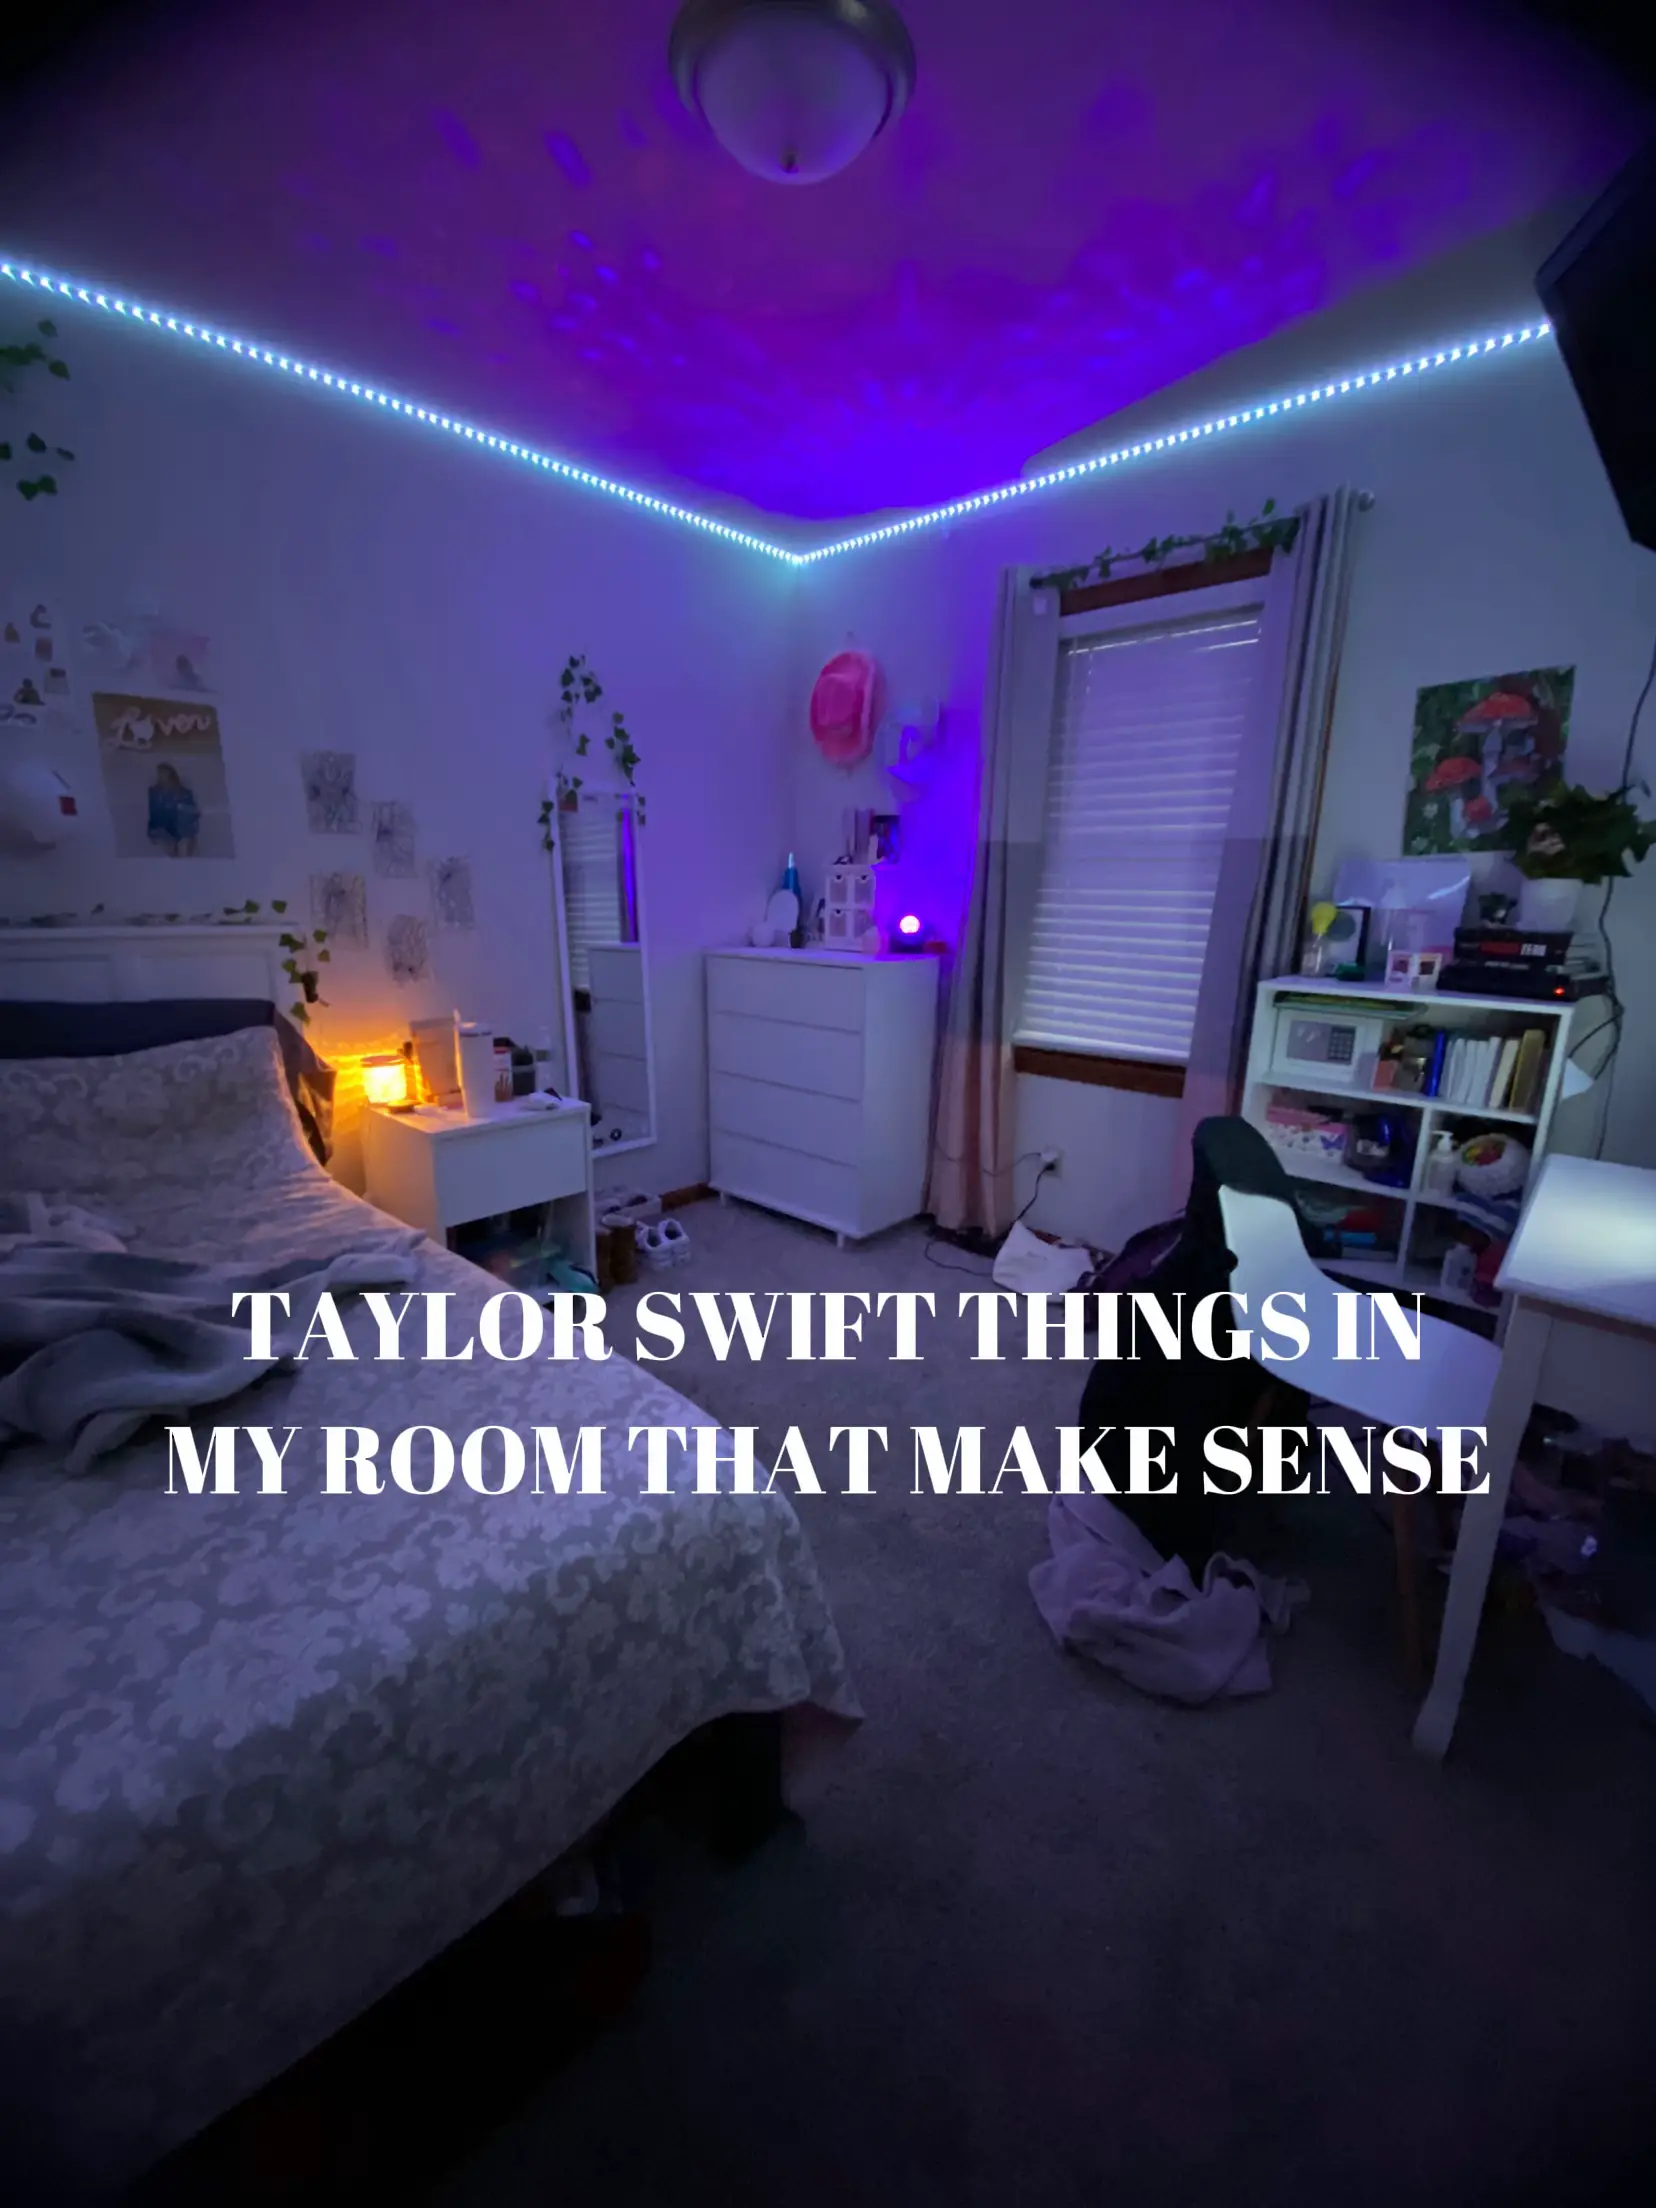 TAYLOR SWIFT THINGS IN MY ROOM THAT MAKE SENSE, Gallery posted by lexi